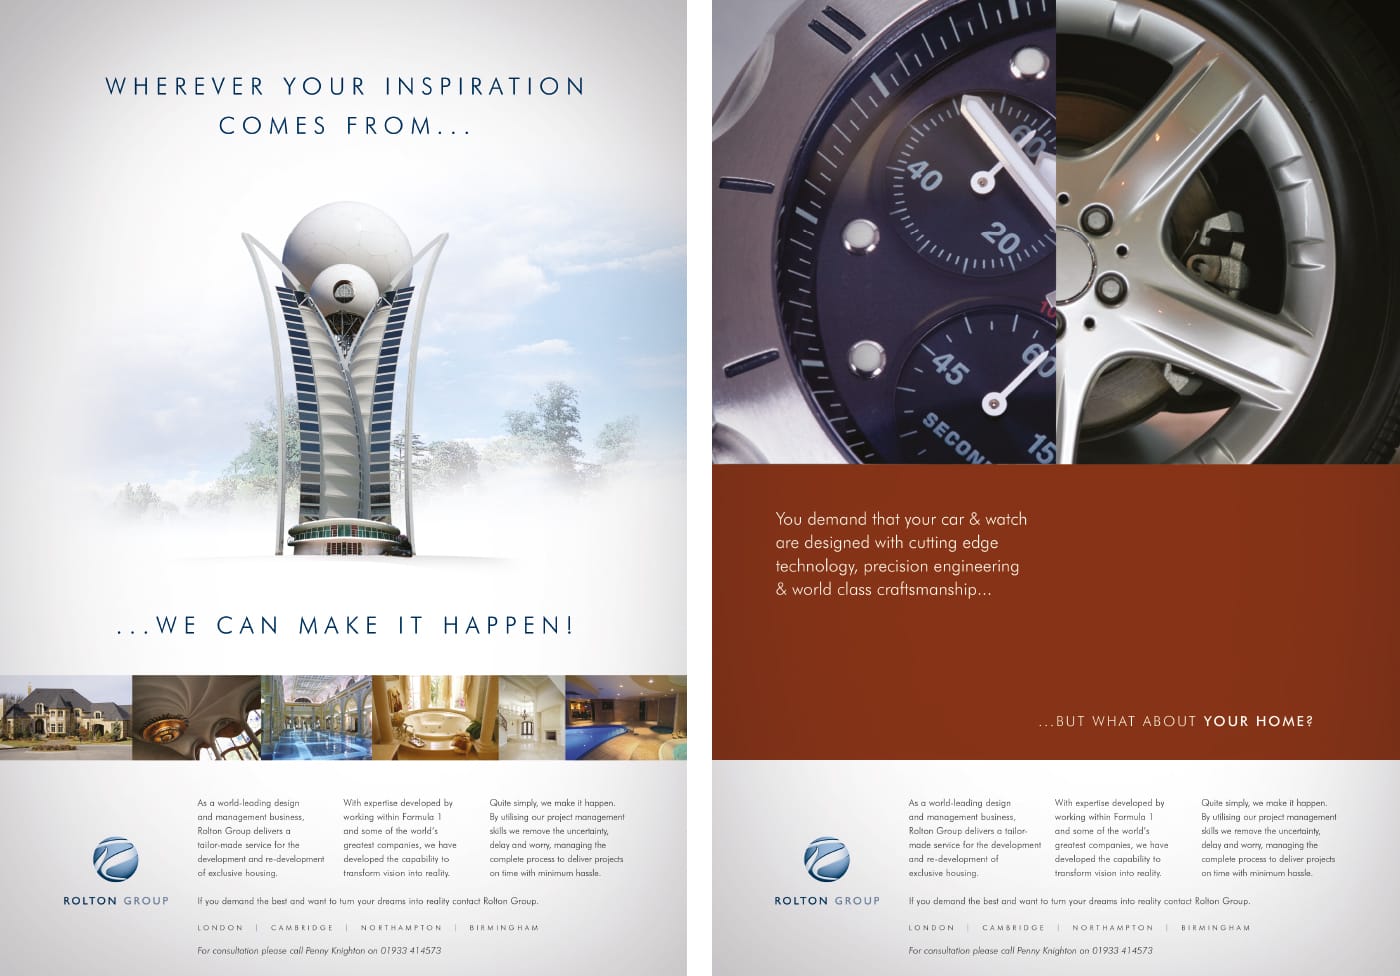 Press advertising campaign created on behalf of a large independent engineering group.